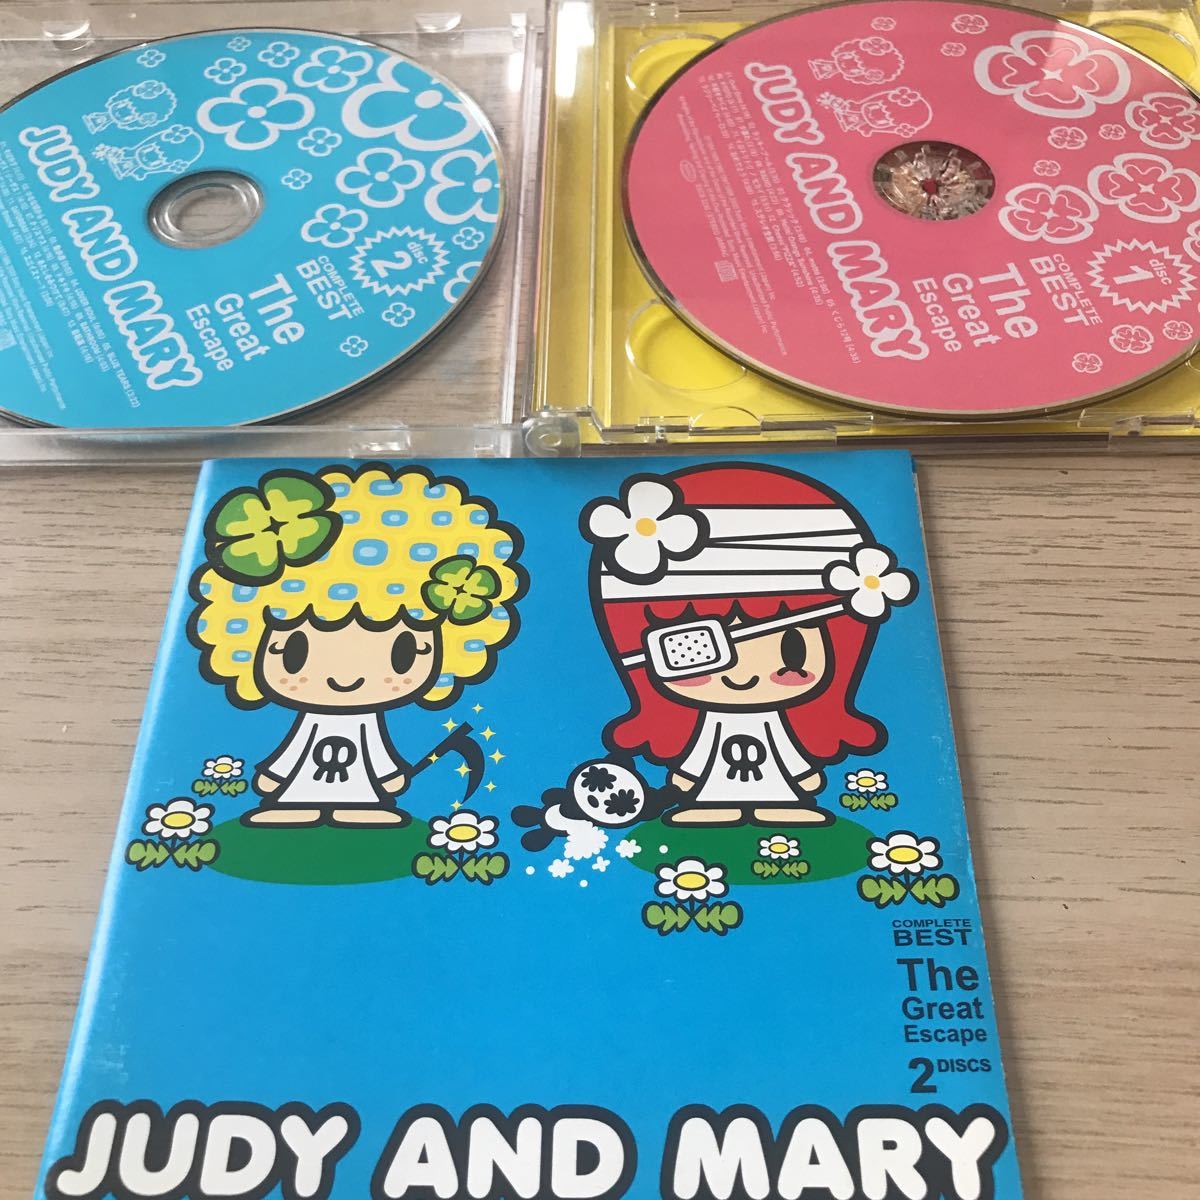 JUDY AND MARY ★ Great Escape ★ 2 枚組CD_画像1